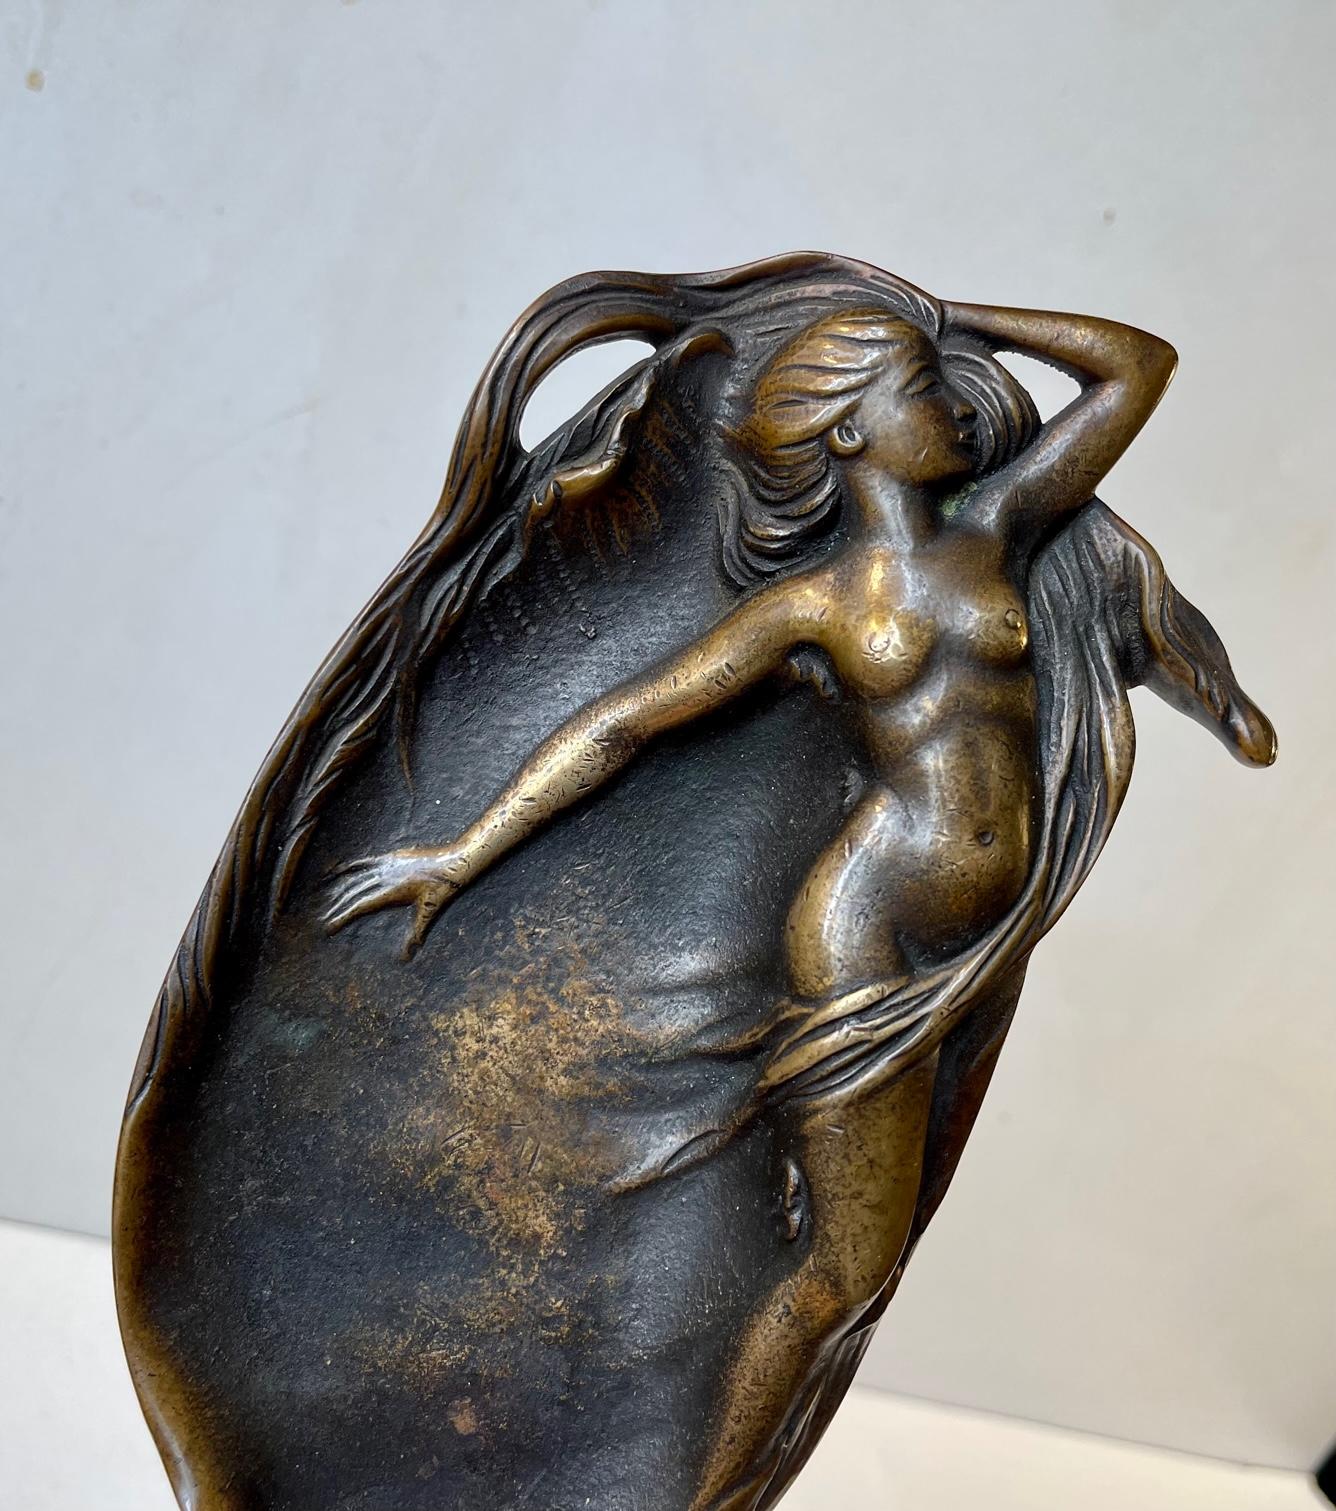 Detailed dish in cast bronze depicting a naked you woman with long hair. Cast in France circa 1910-20. Measurements: 20 x 10 x 3.5 cm.